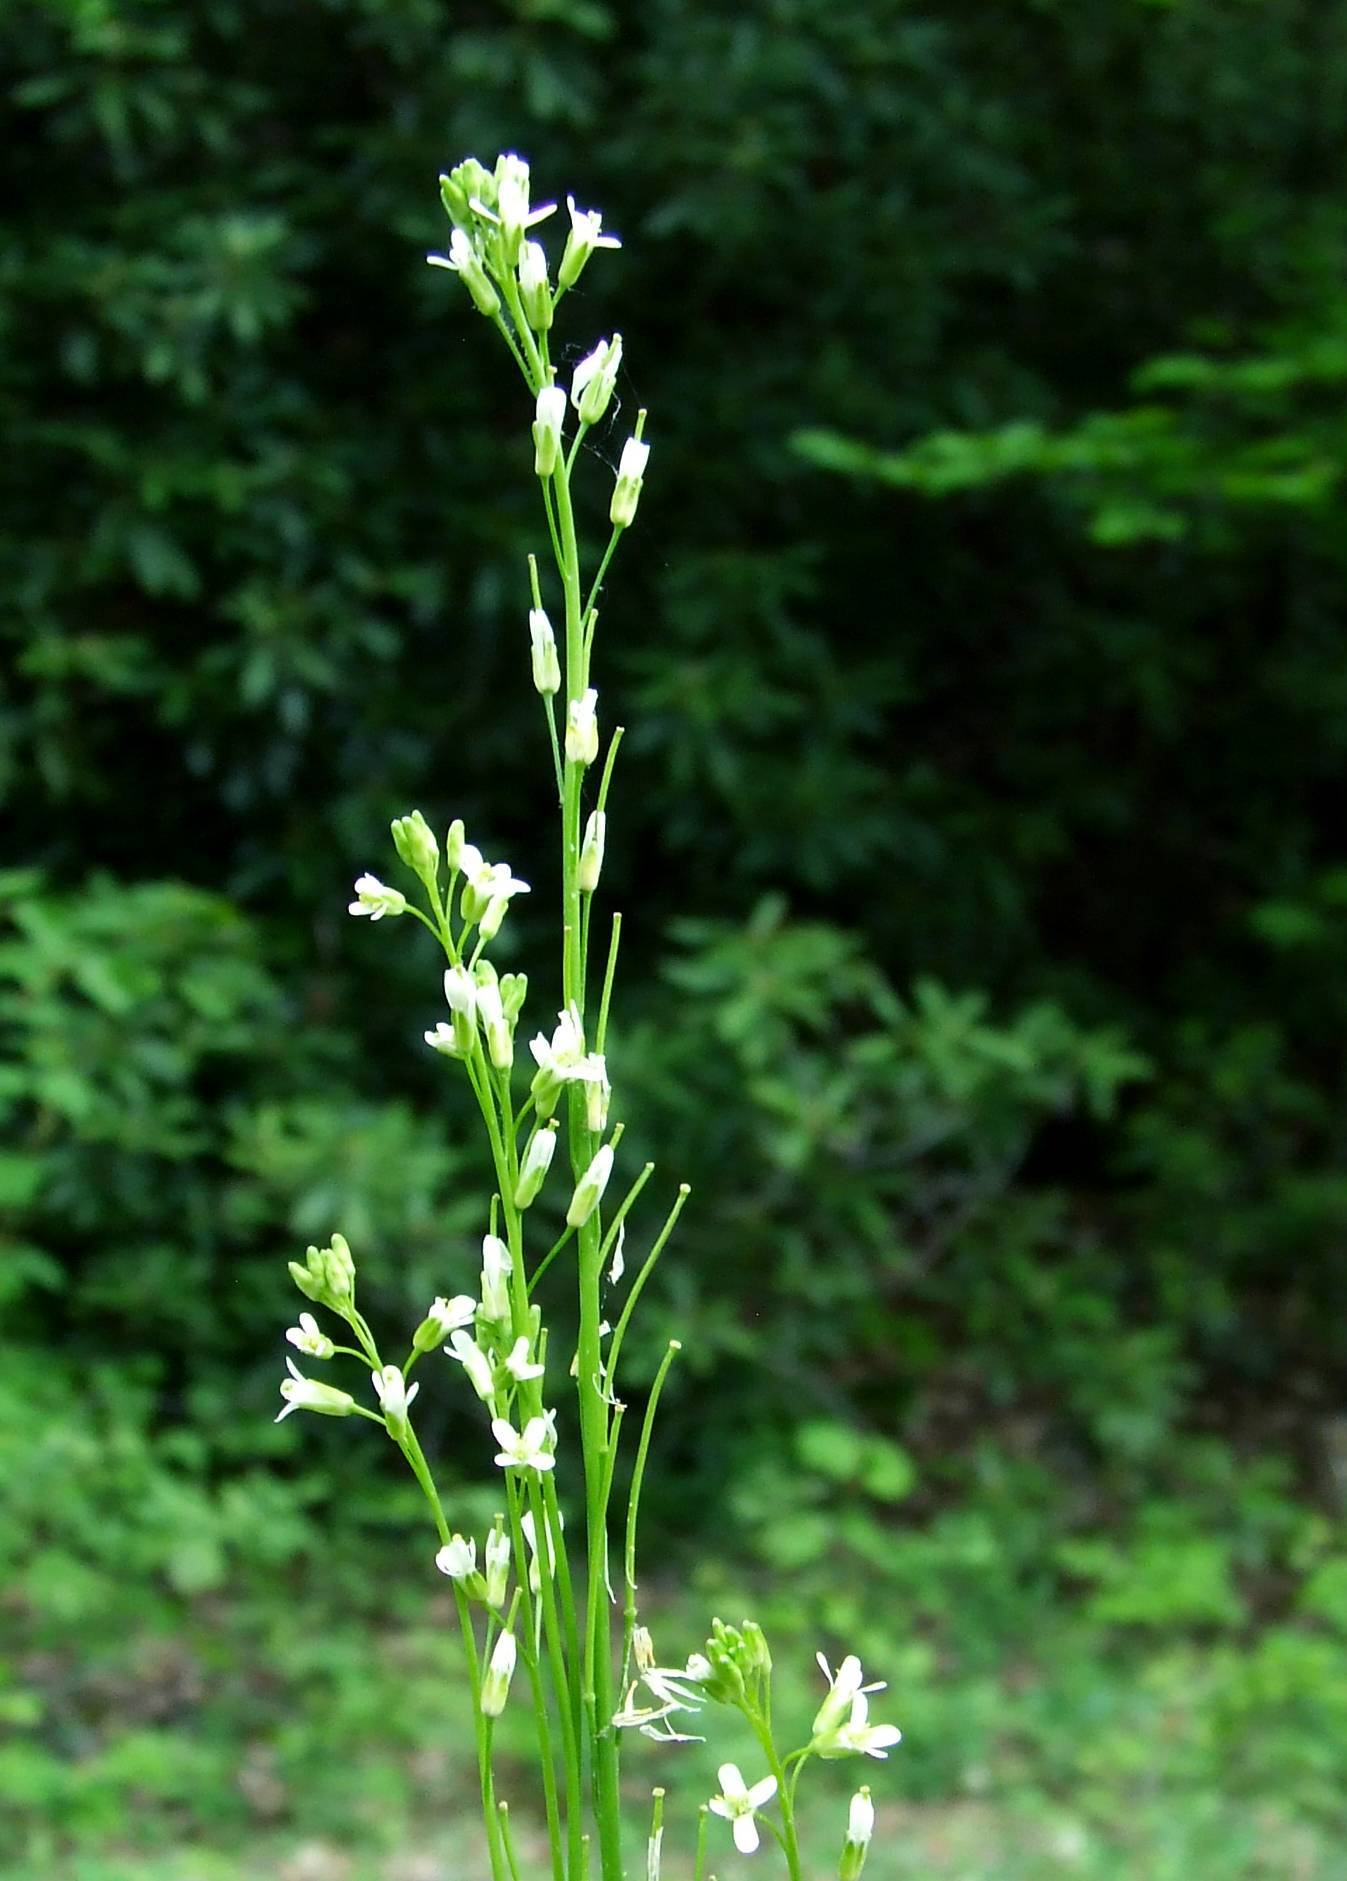 white flowers and green buds with lush-green foliage and stems
